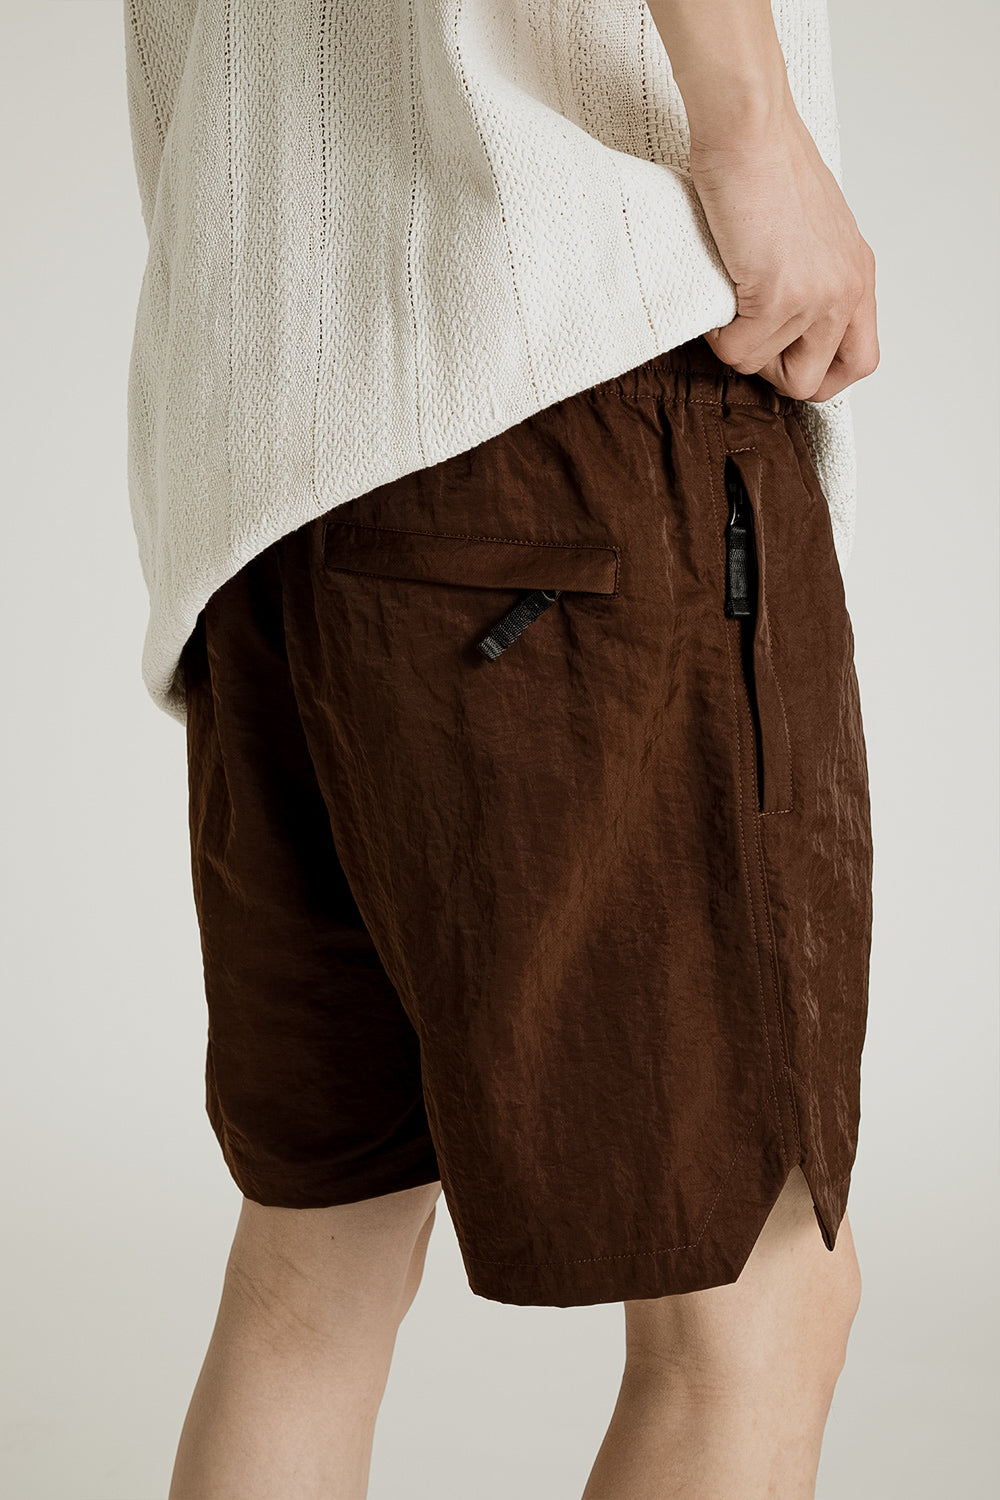 Sunflower Mike Shorts in Brown